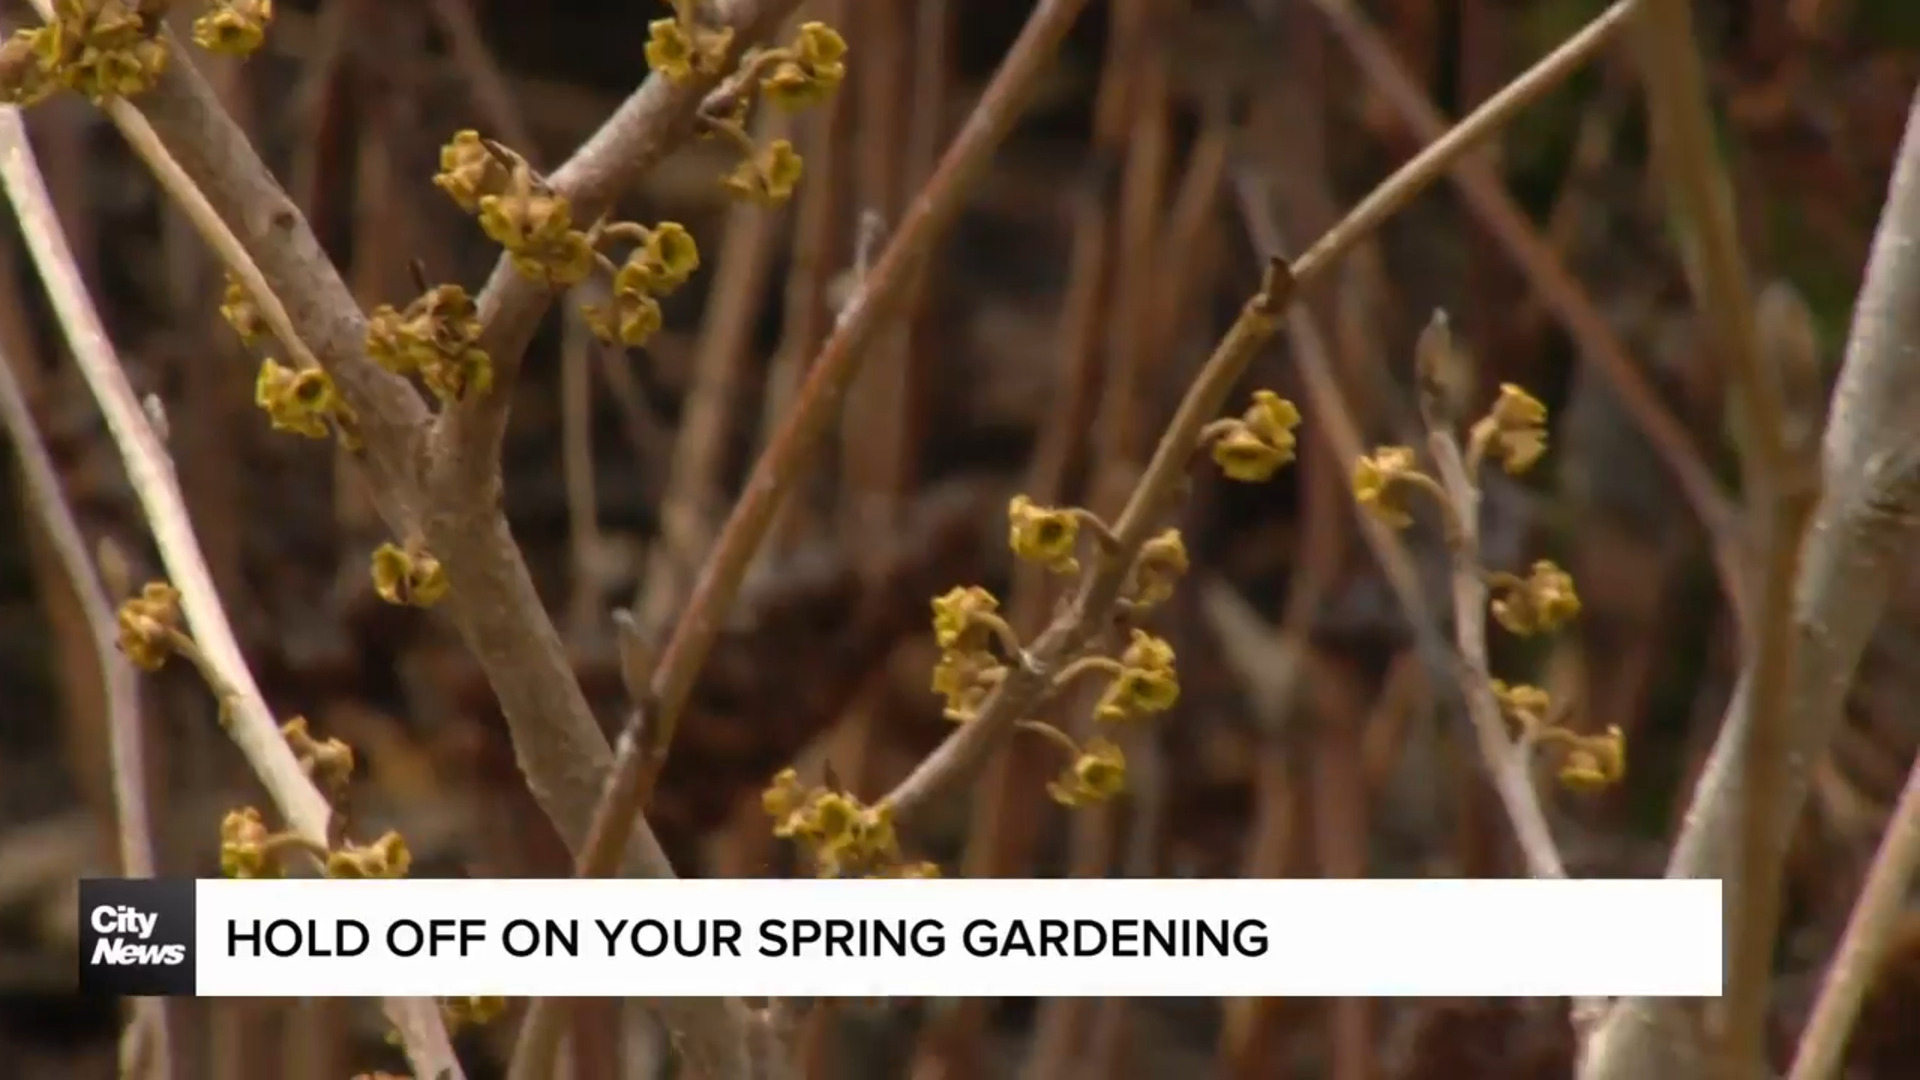 Hold off on you spring gardening